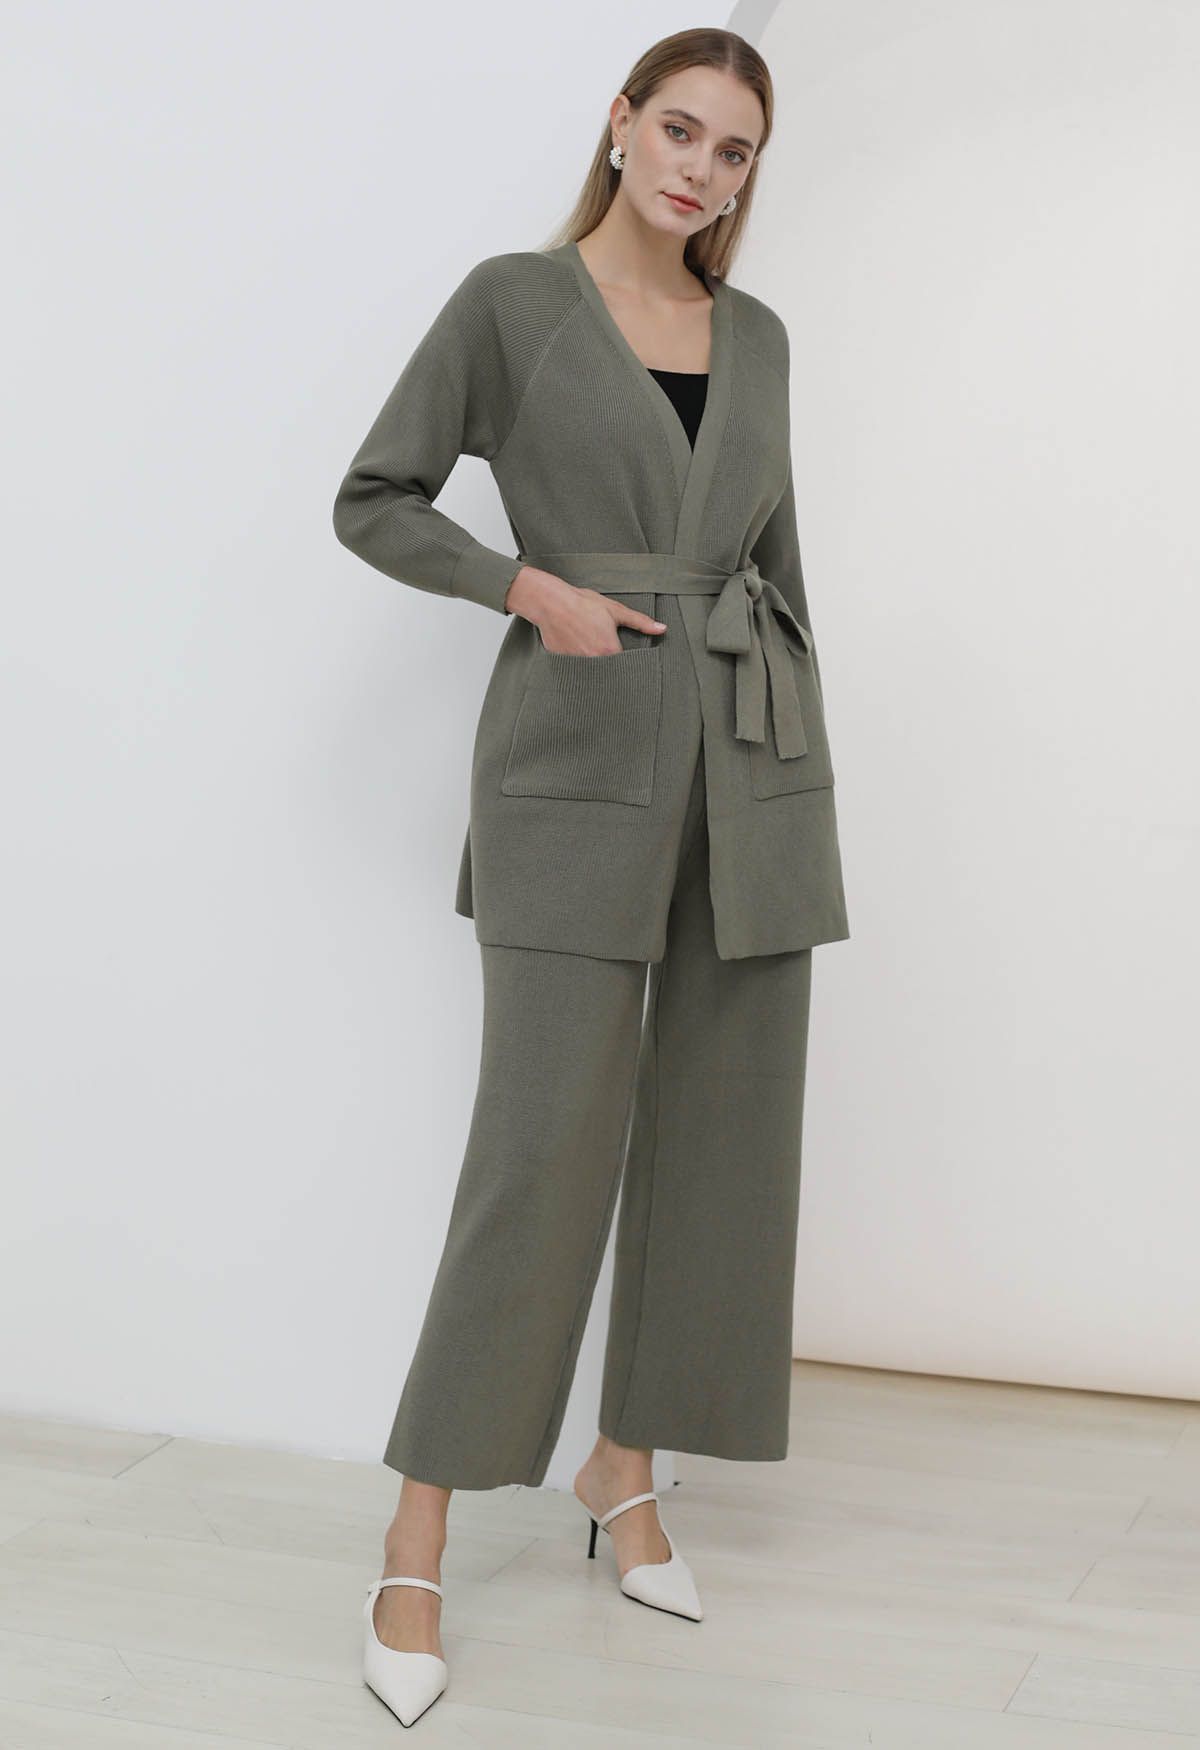 Tie-Waist Knit Cardigan and Pants Set in Sage